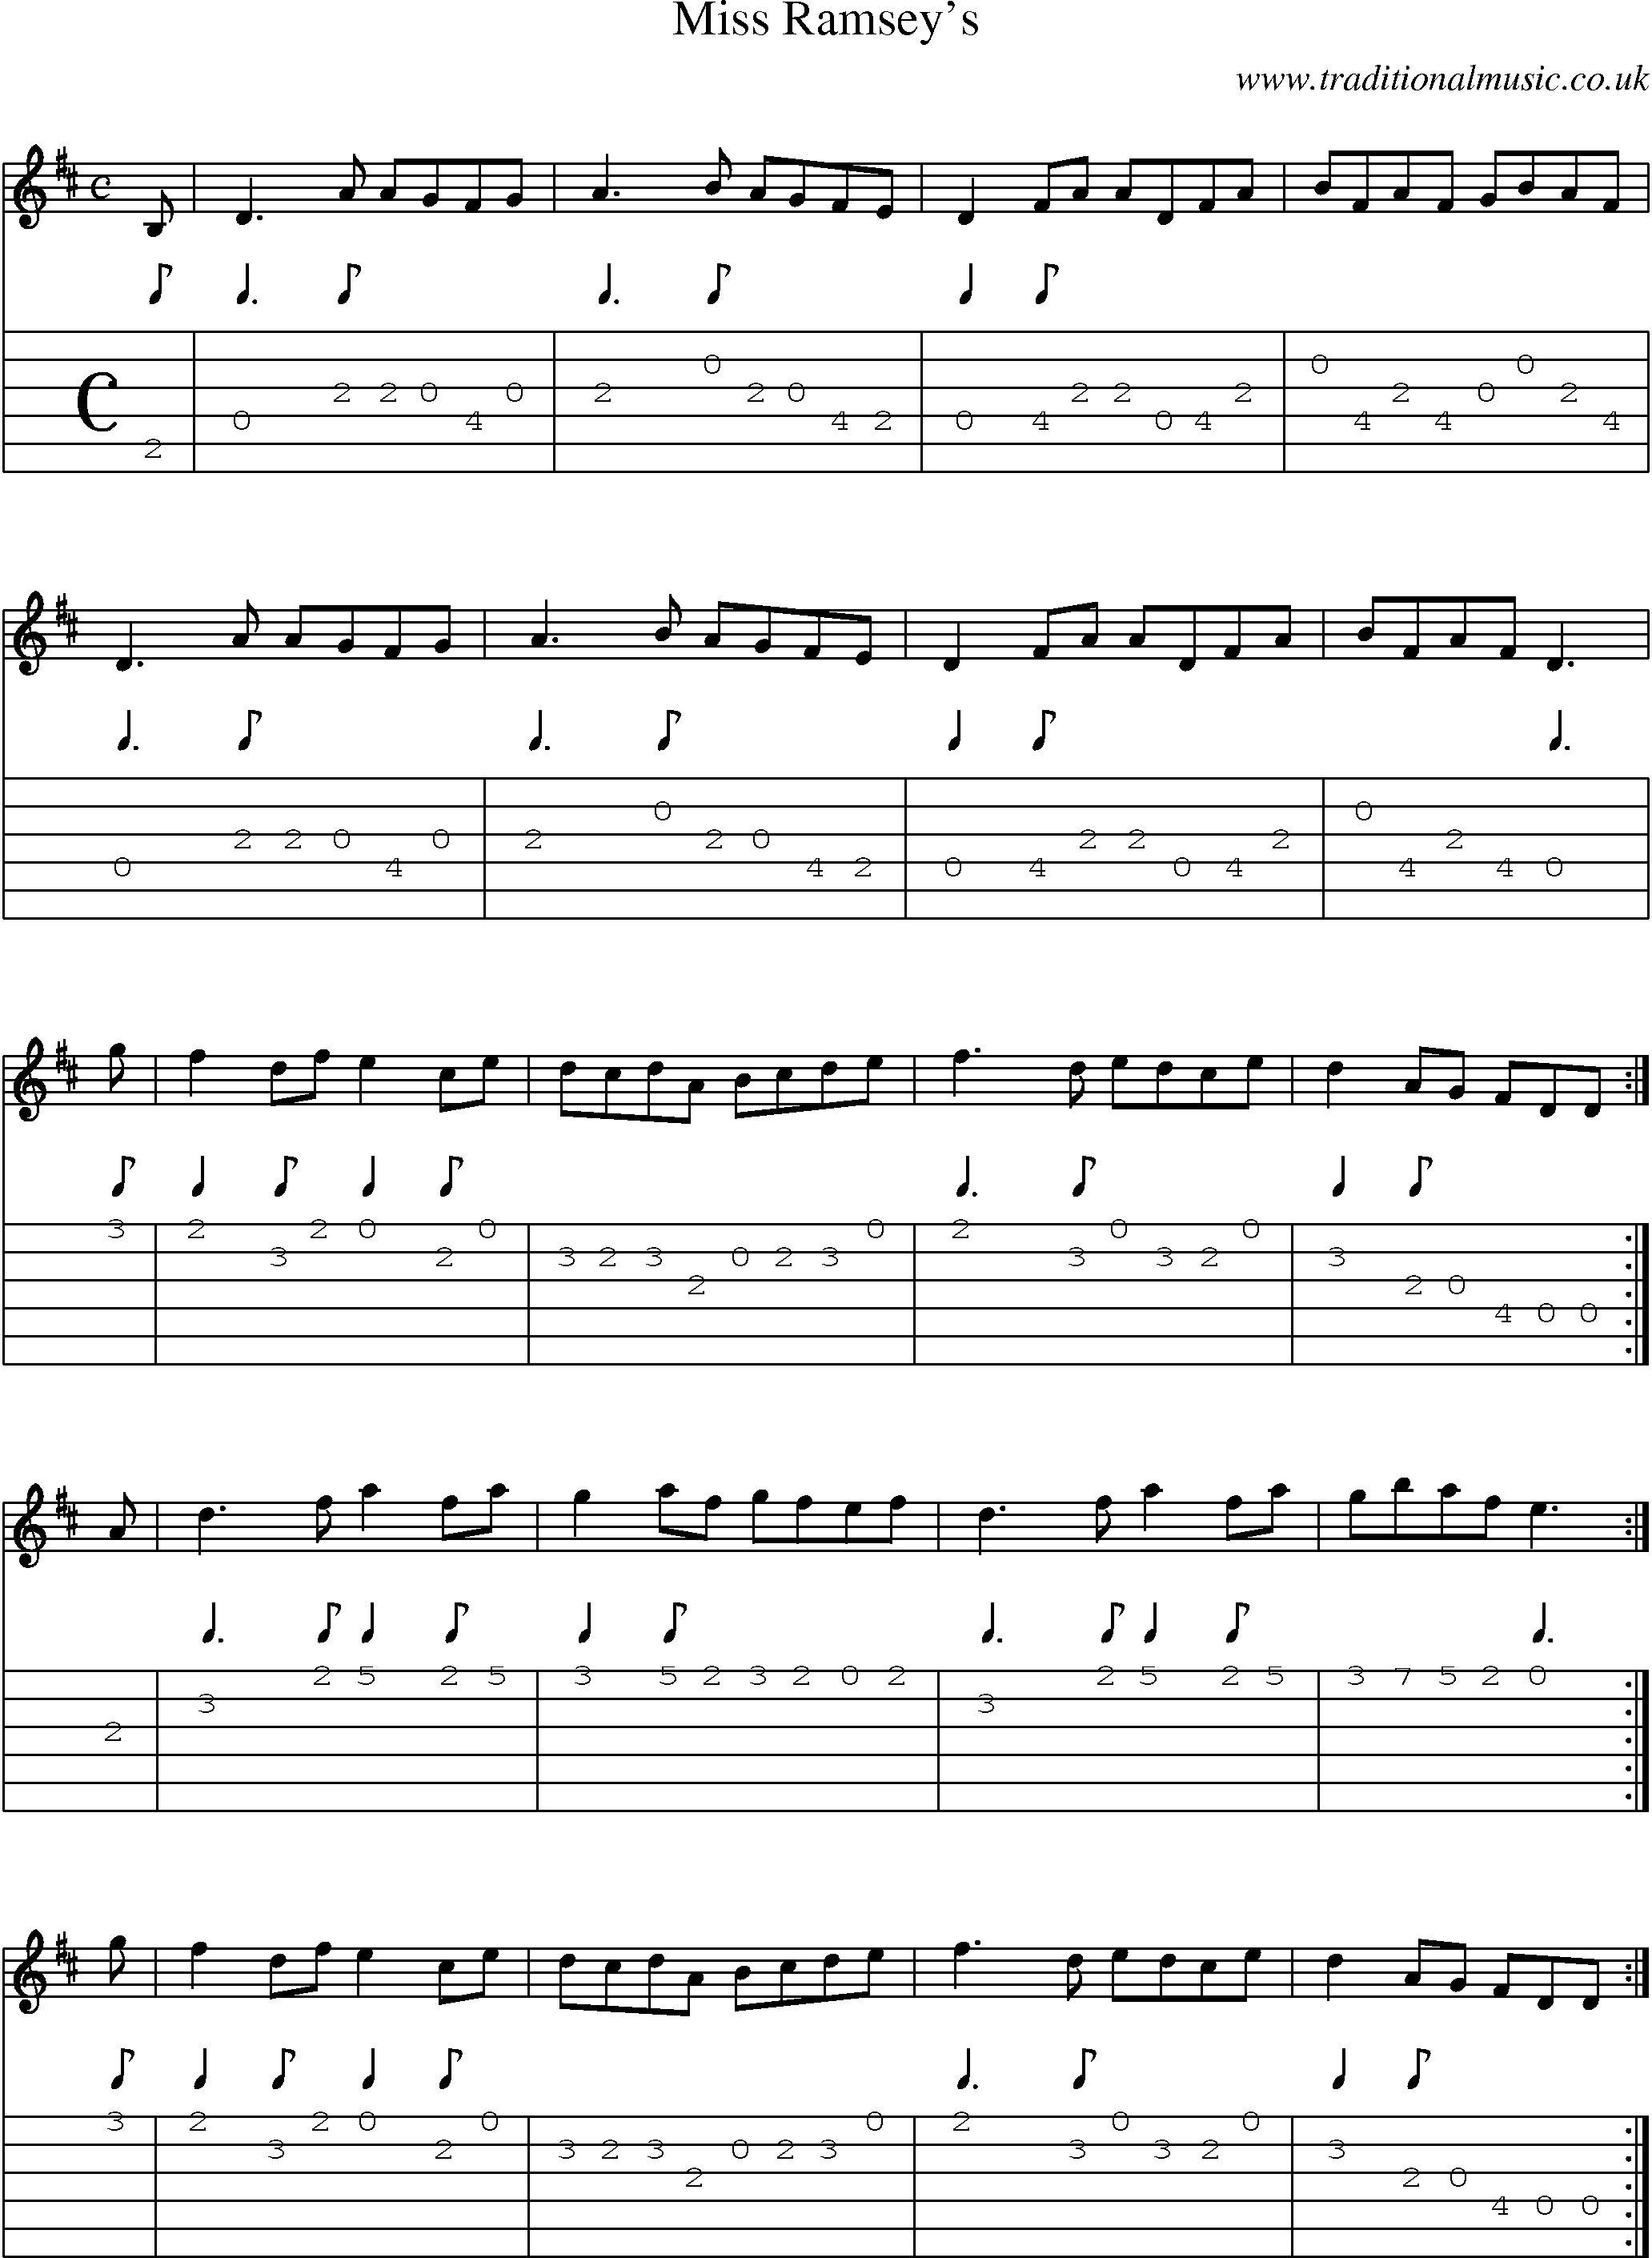 Music Score and Guitar Tabs for Miss Ramseys